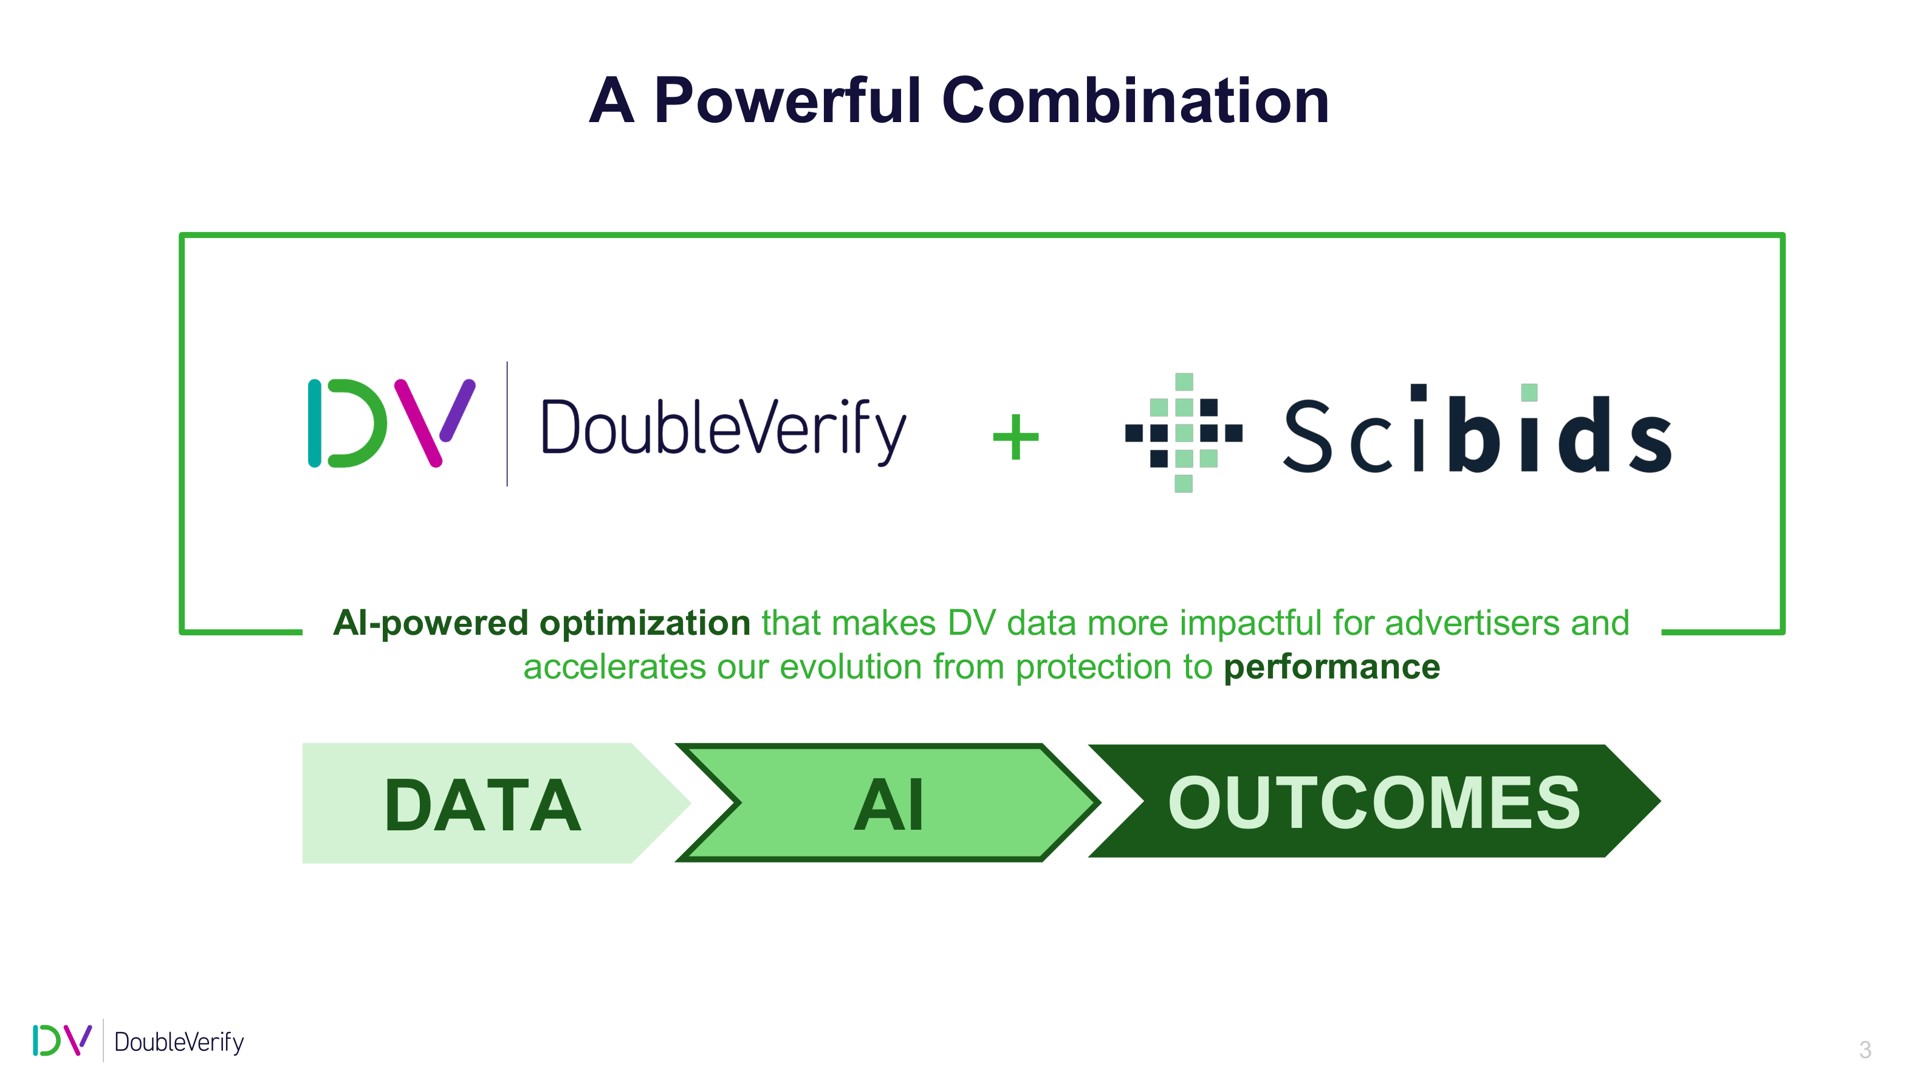 a powerful combination data outcomes | DoubleVerify